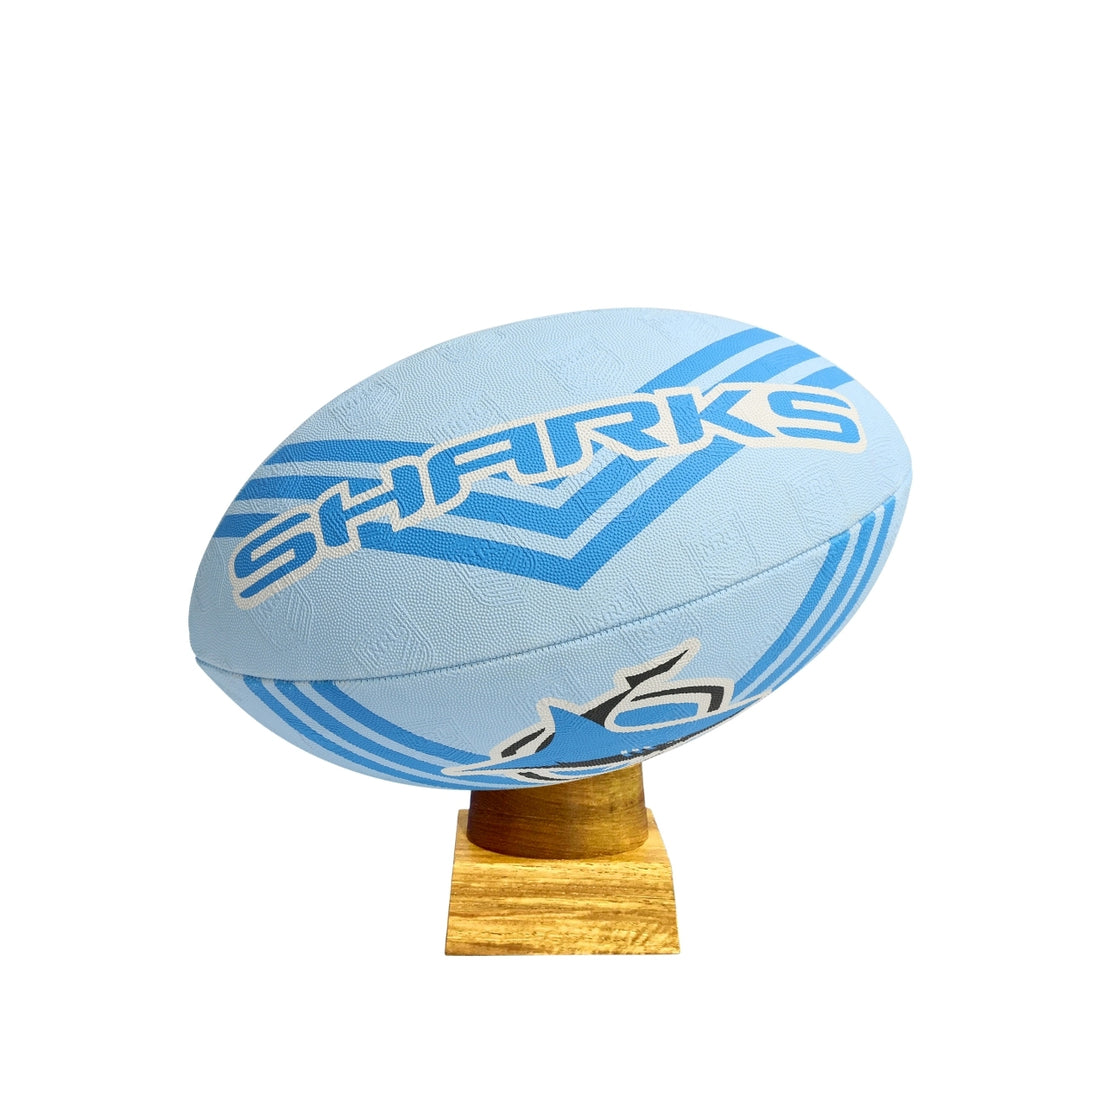 Cronulla Sharks Football Urn for Ashes with personalised timber display stand